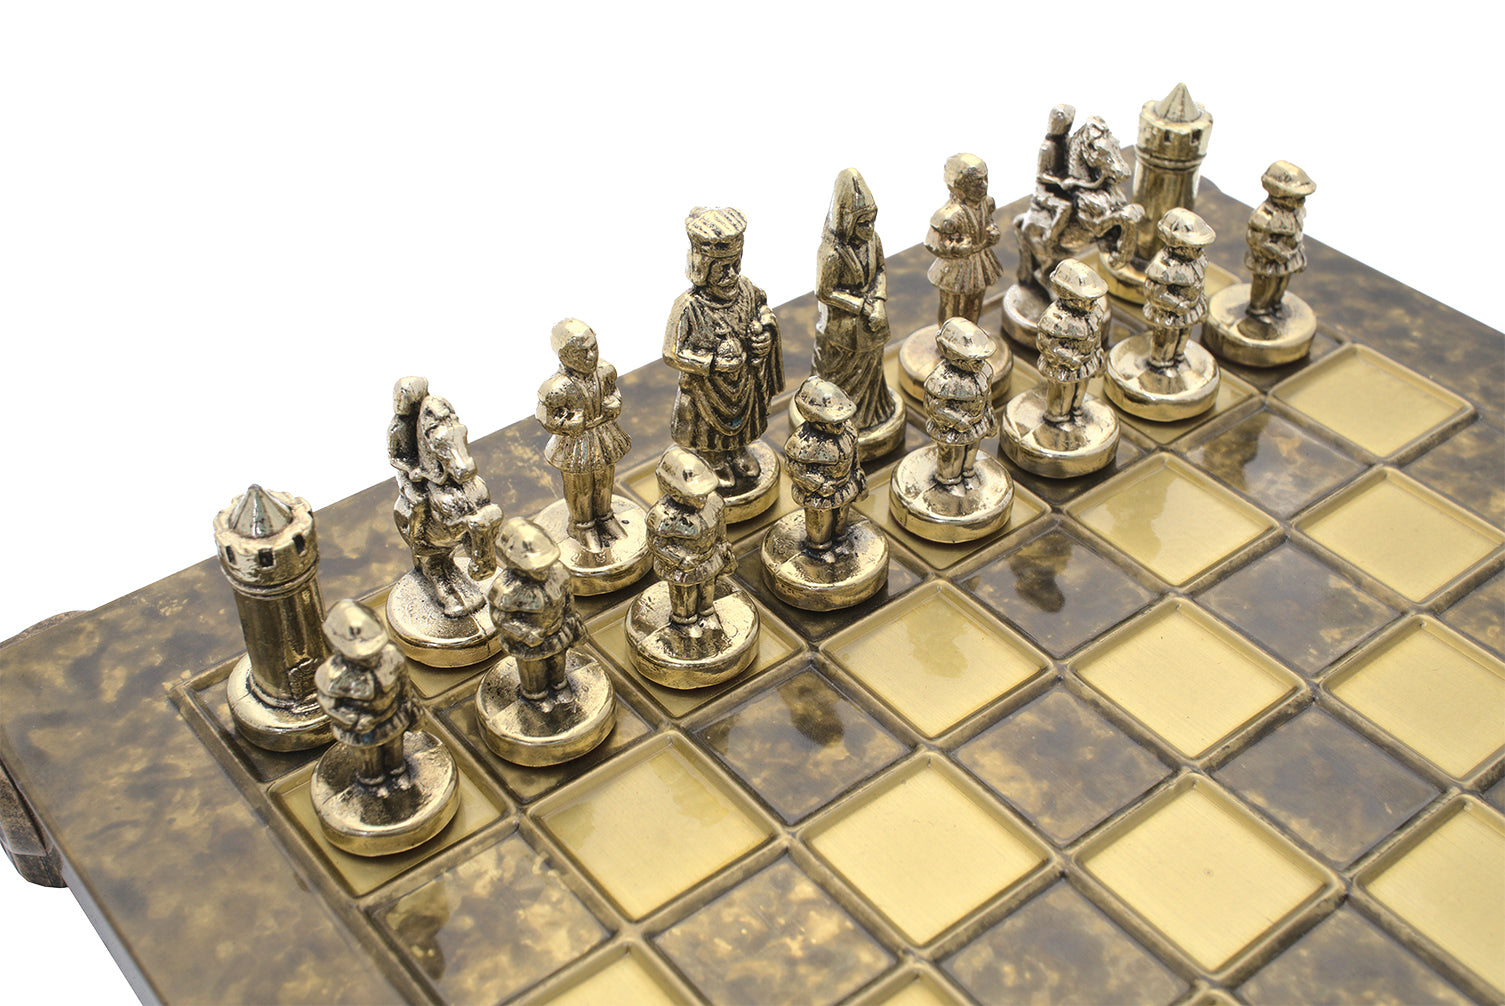 The Manopoulos Byzantine Empire Chess Set with Wooden Case in Brown - COMPACT